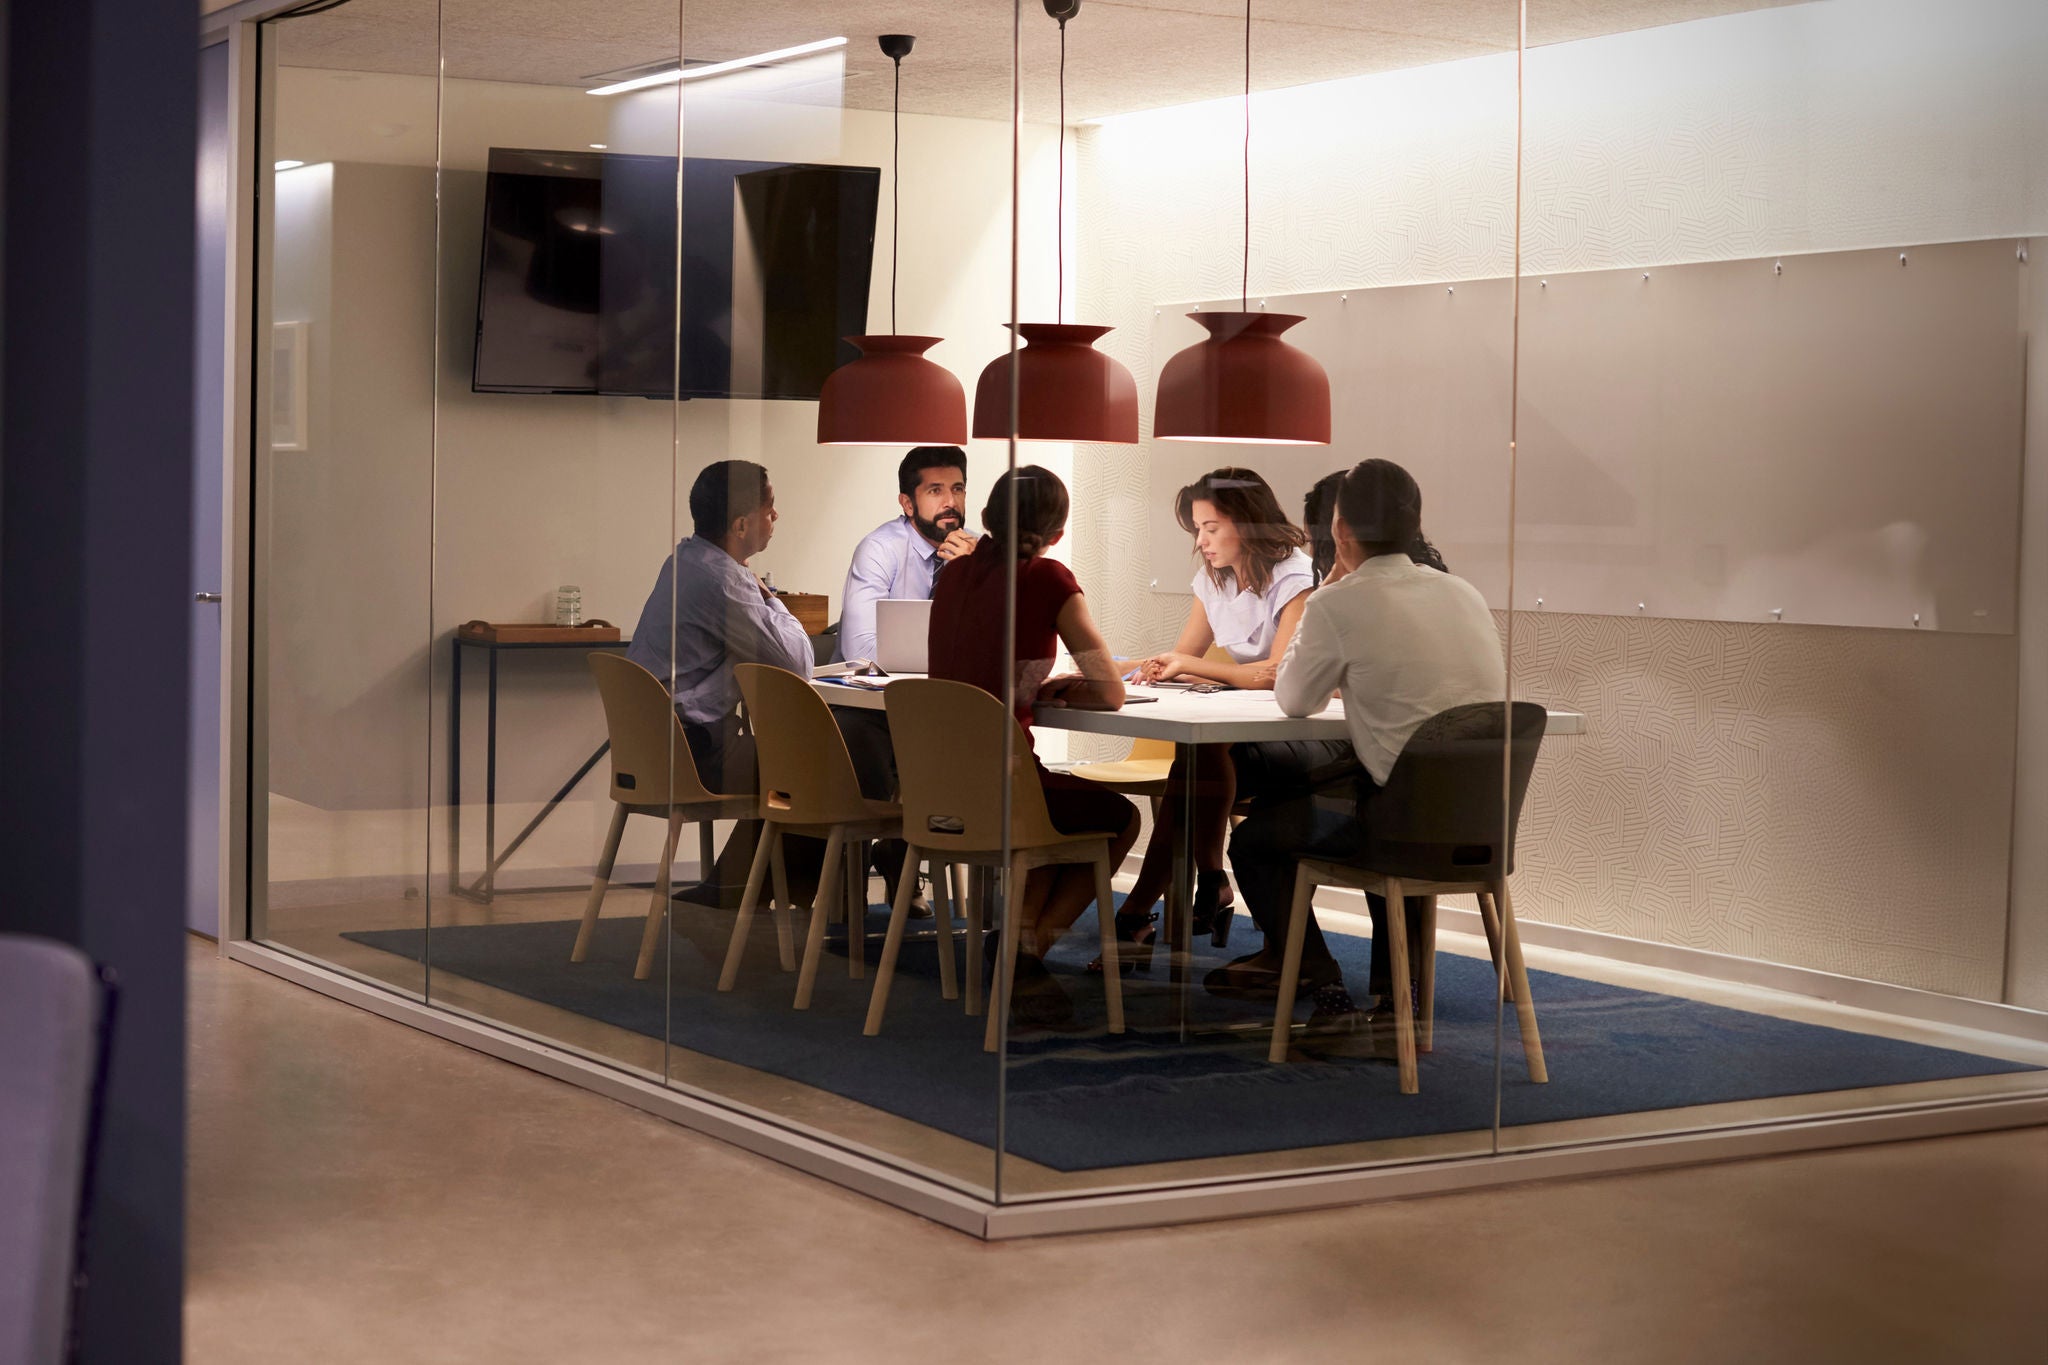 Corporate business team at table in a meeting room cubicle